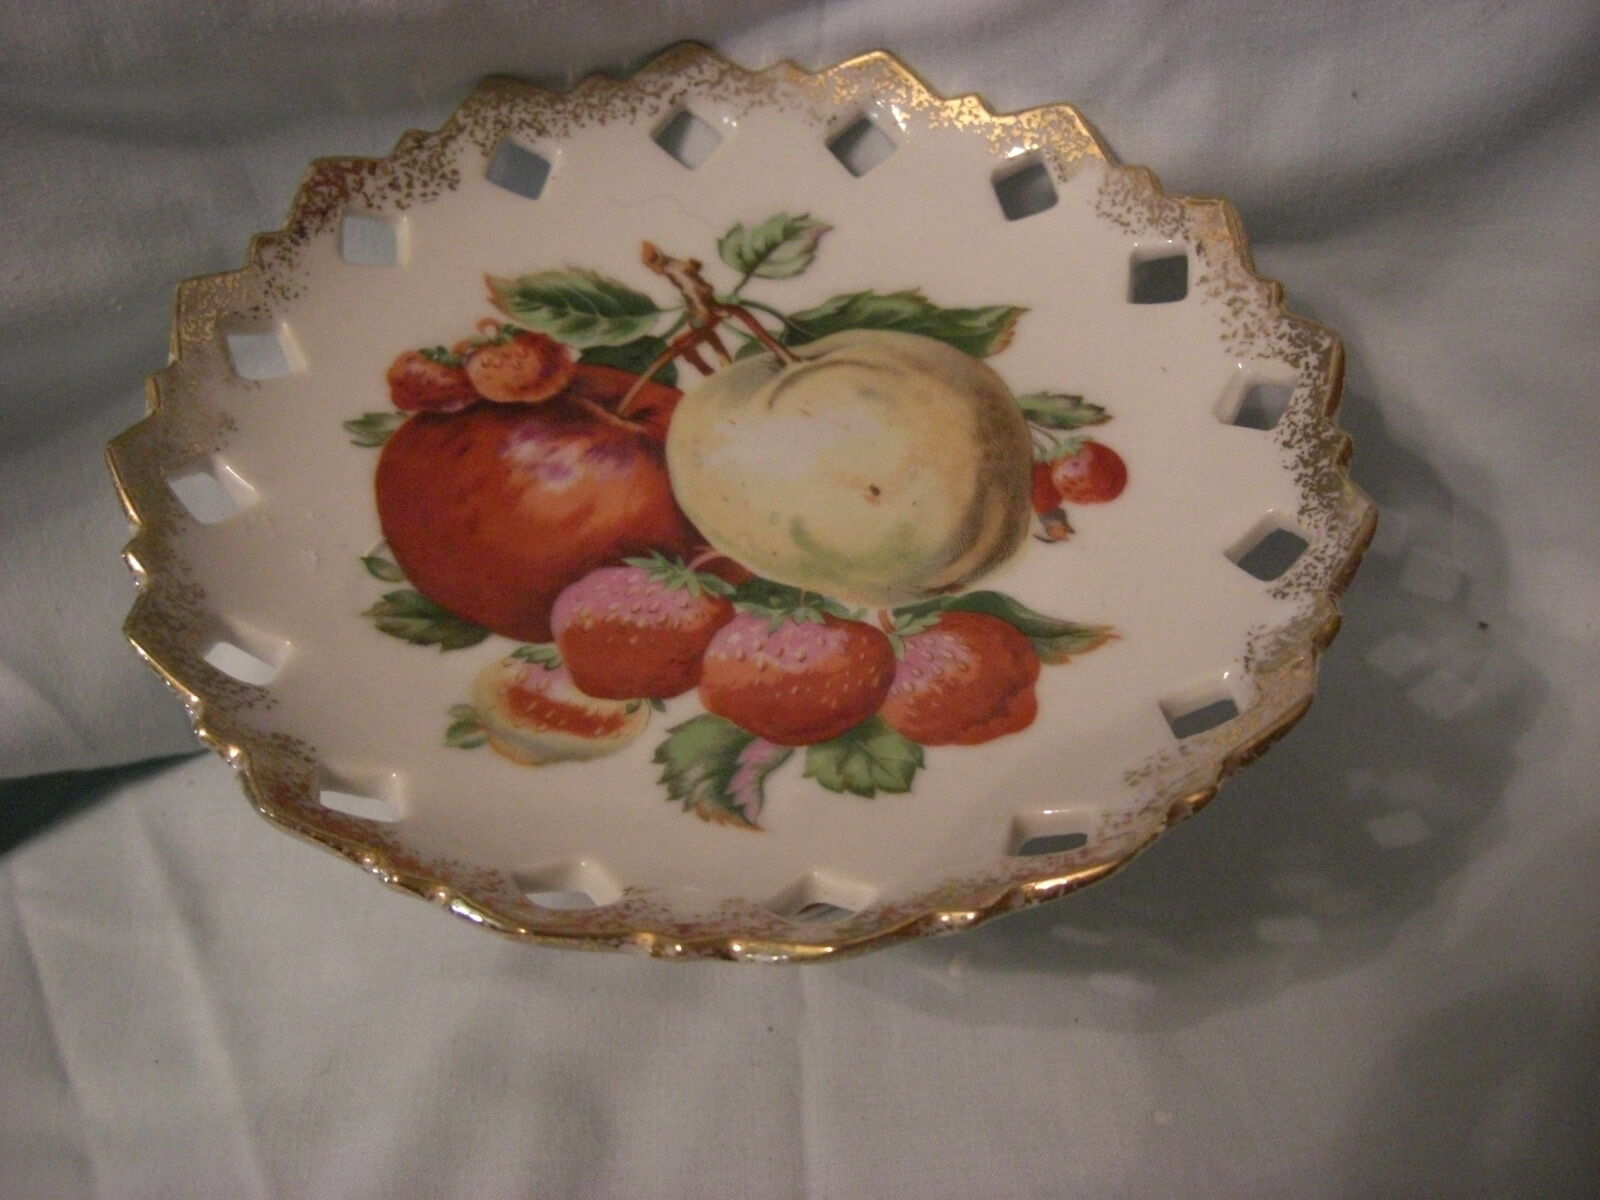 VINTAGE THAMES OF JAPAN HAND PAINTED CHINA PEDESTAL DISH WITH FRUIT PATTERN